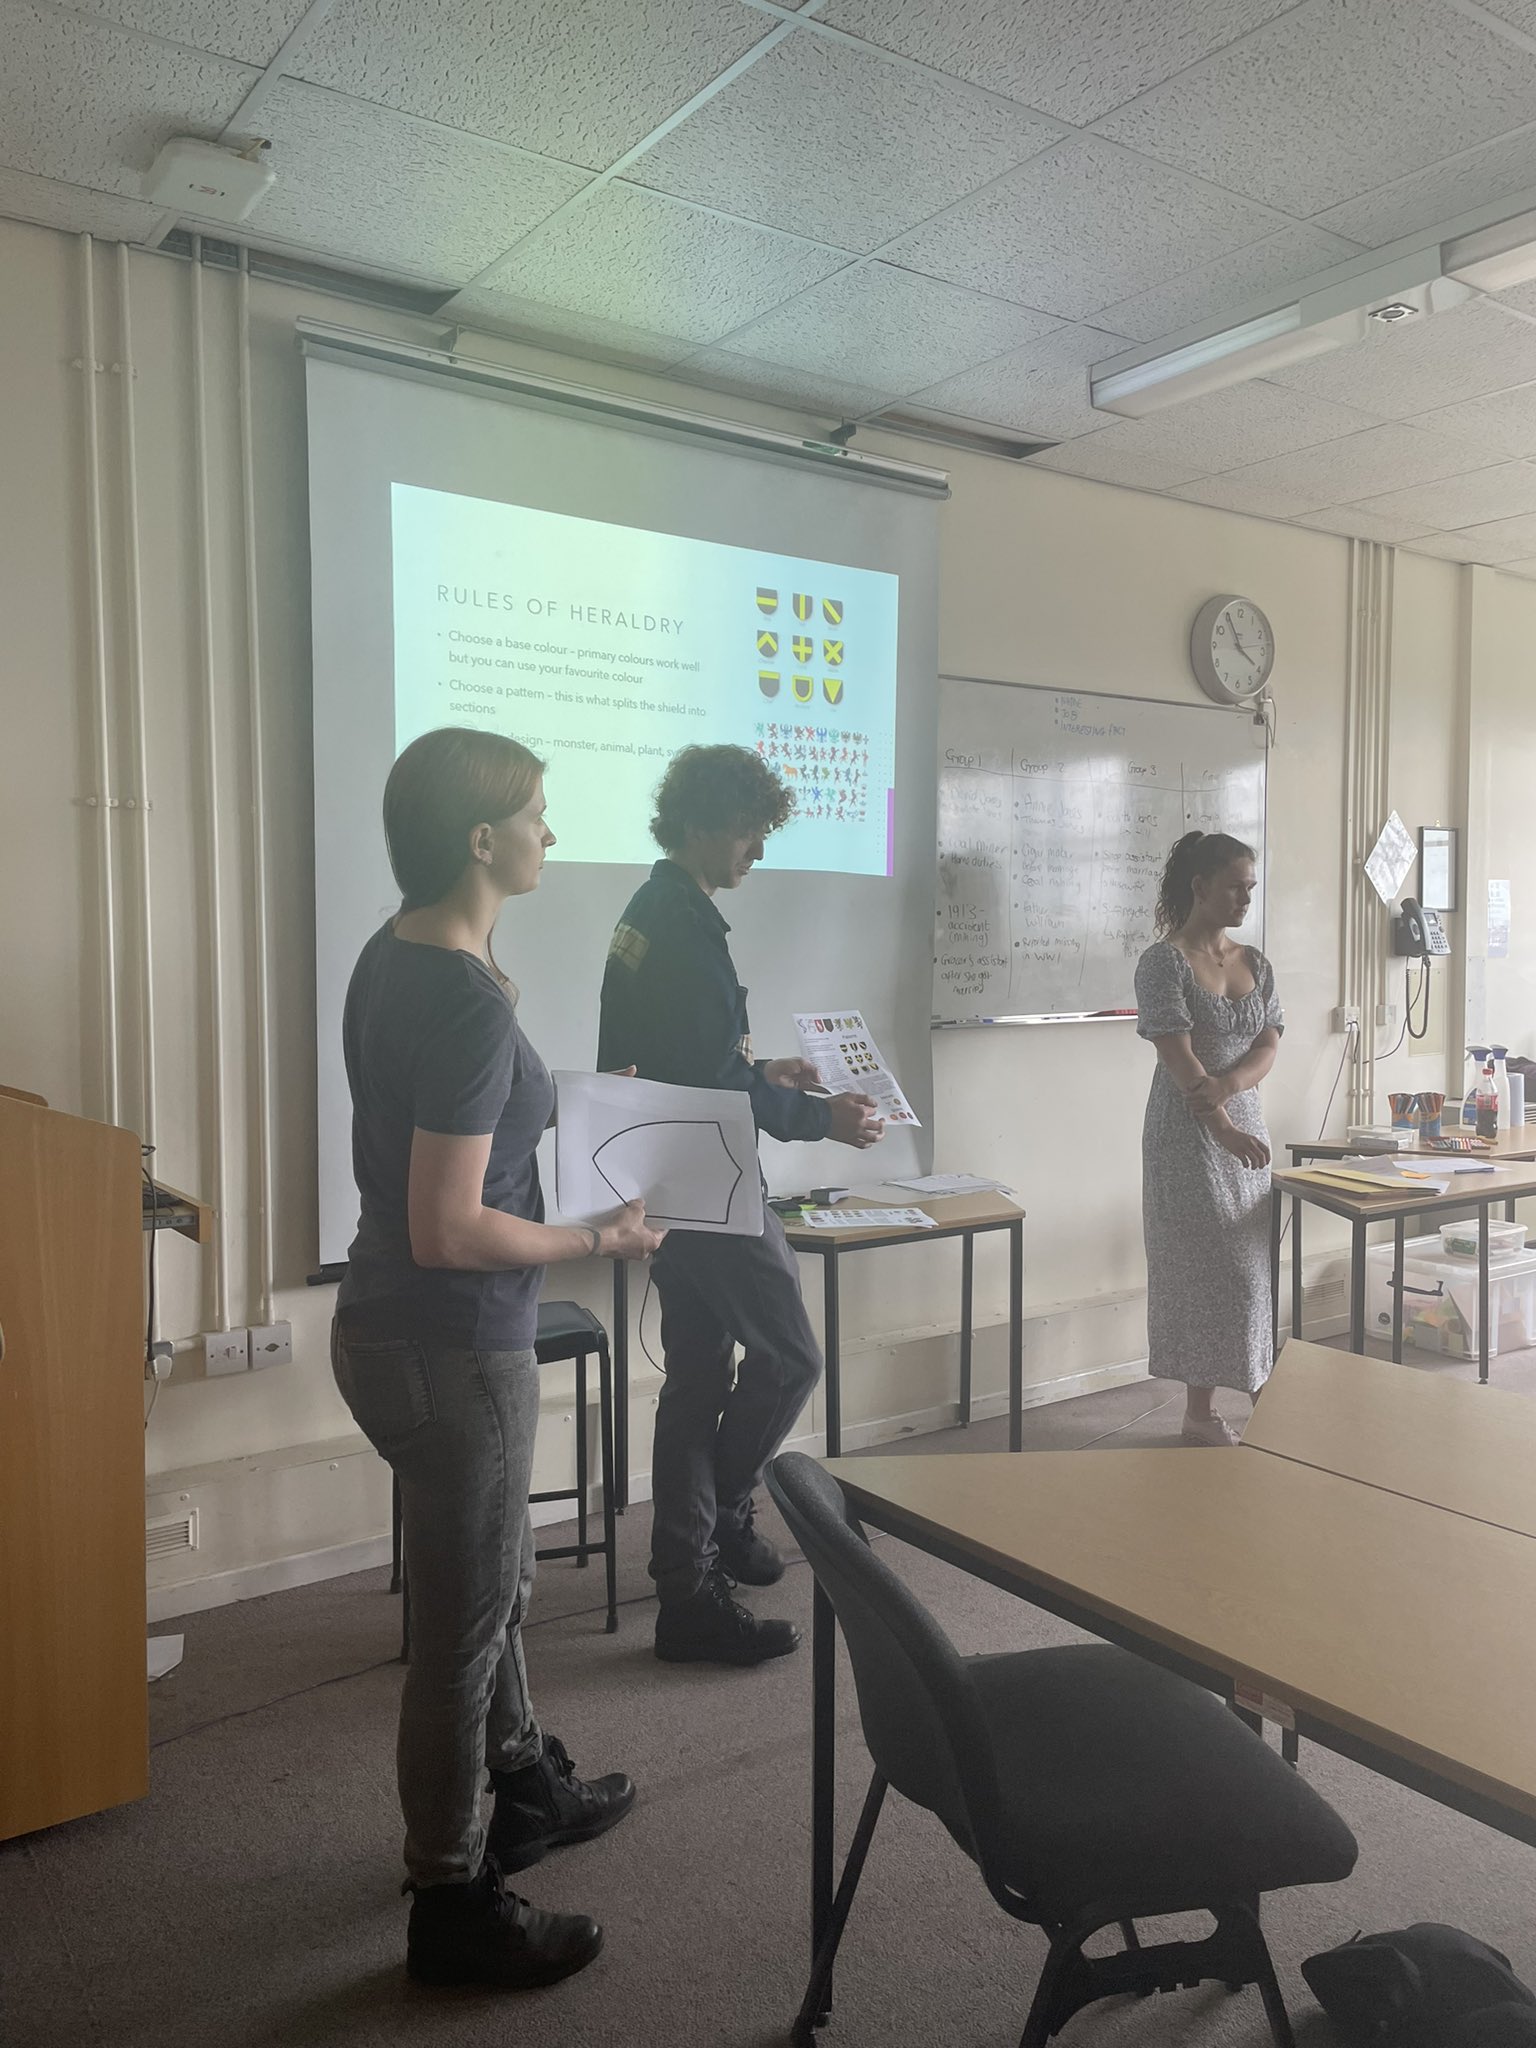 Three people stand at the front of a seminar room, presenting on the rules of heraldry